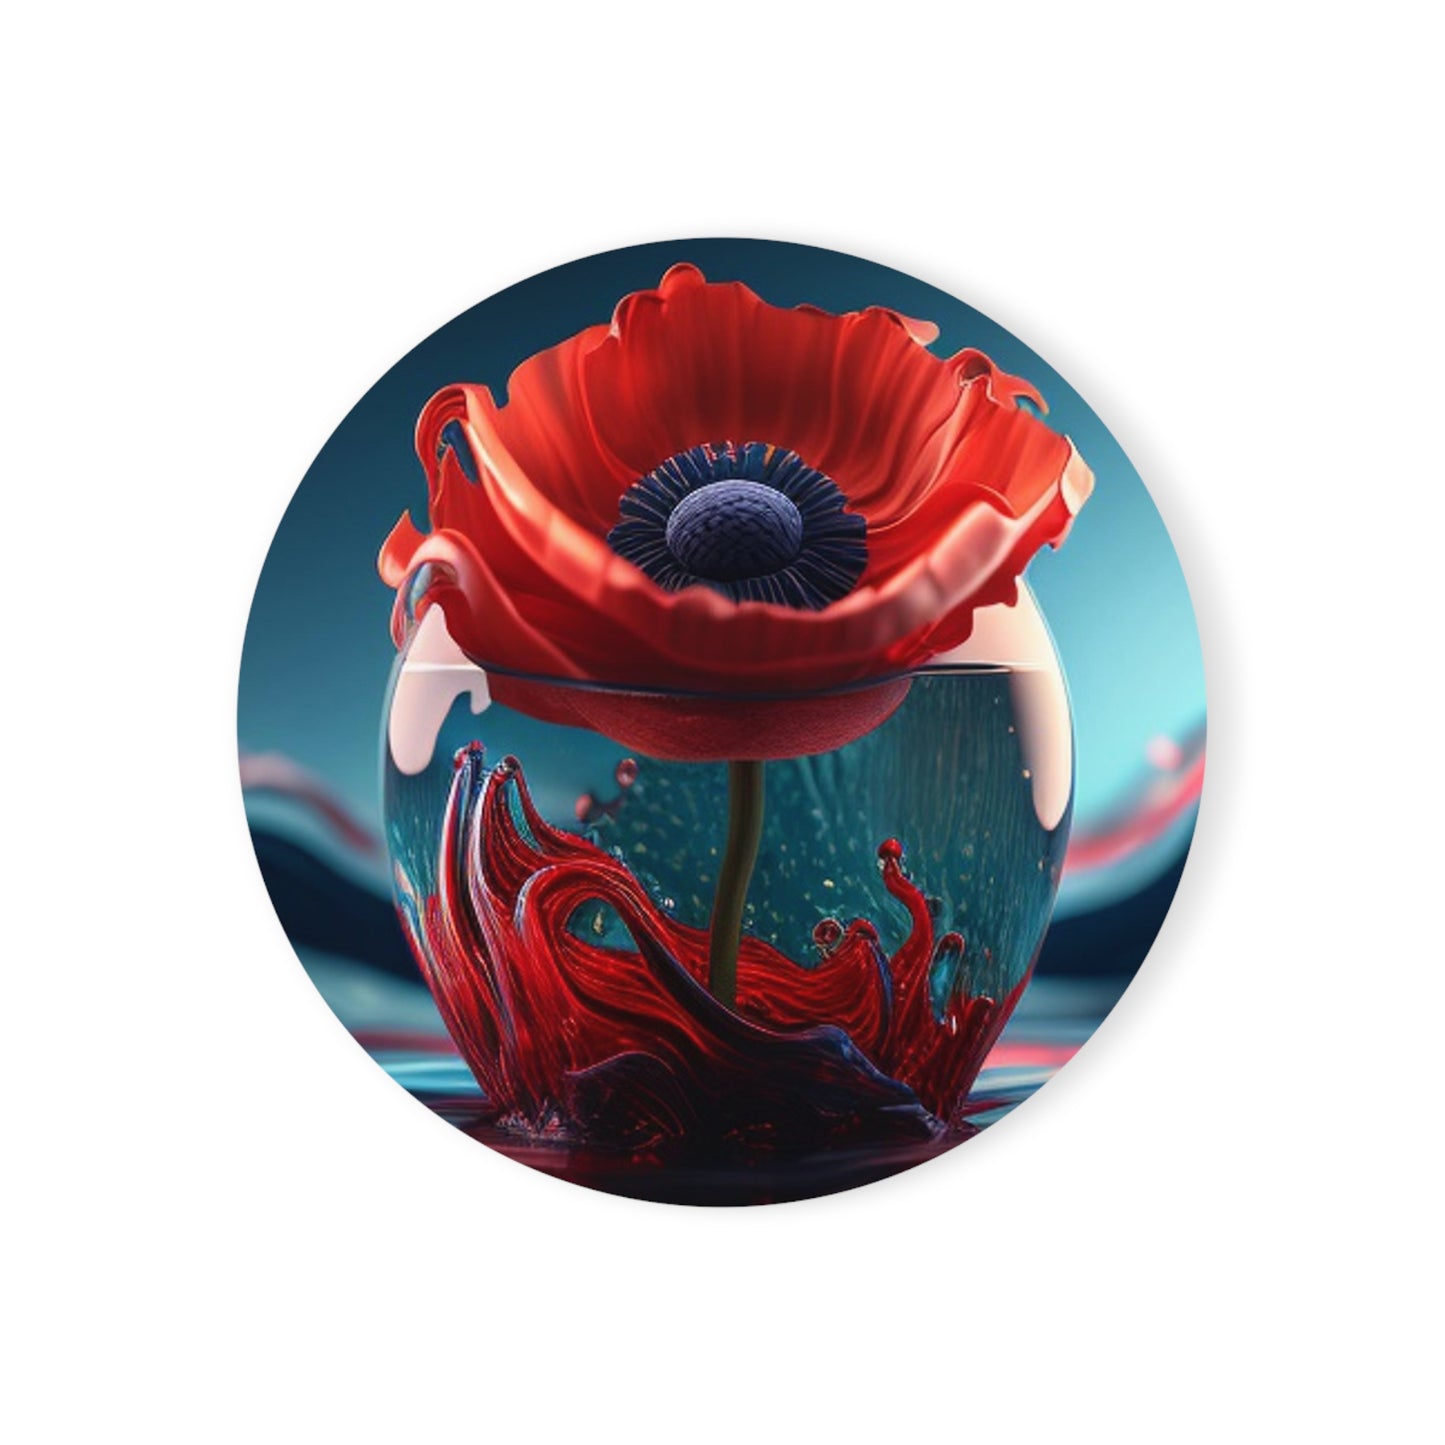 Cork Back Coaster Red Anemone in a Vase 2